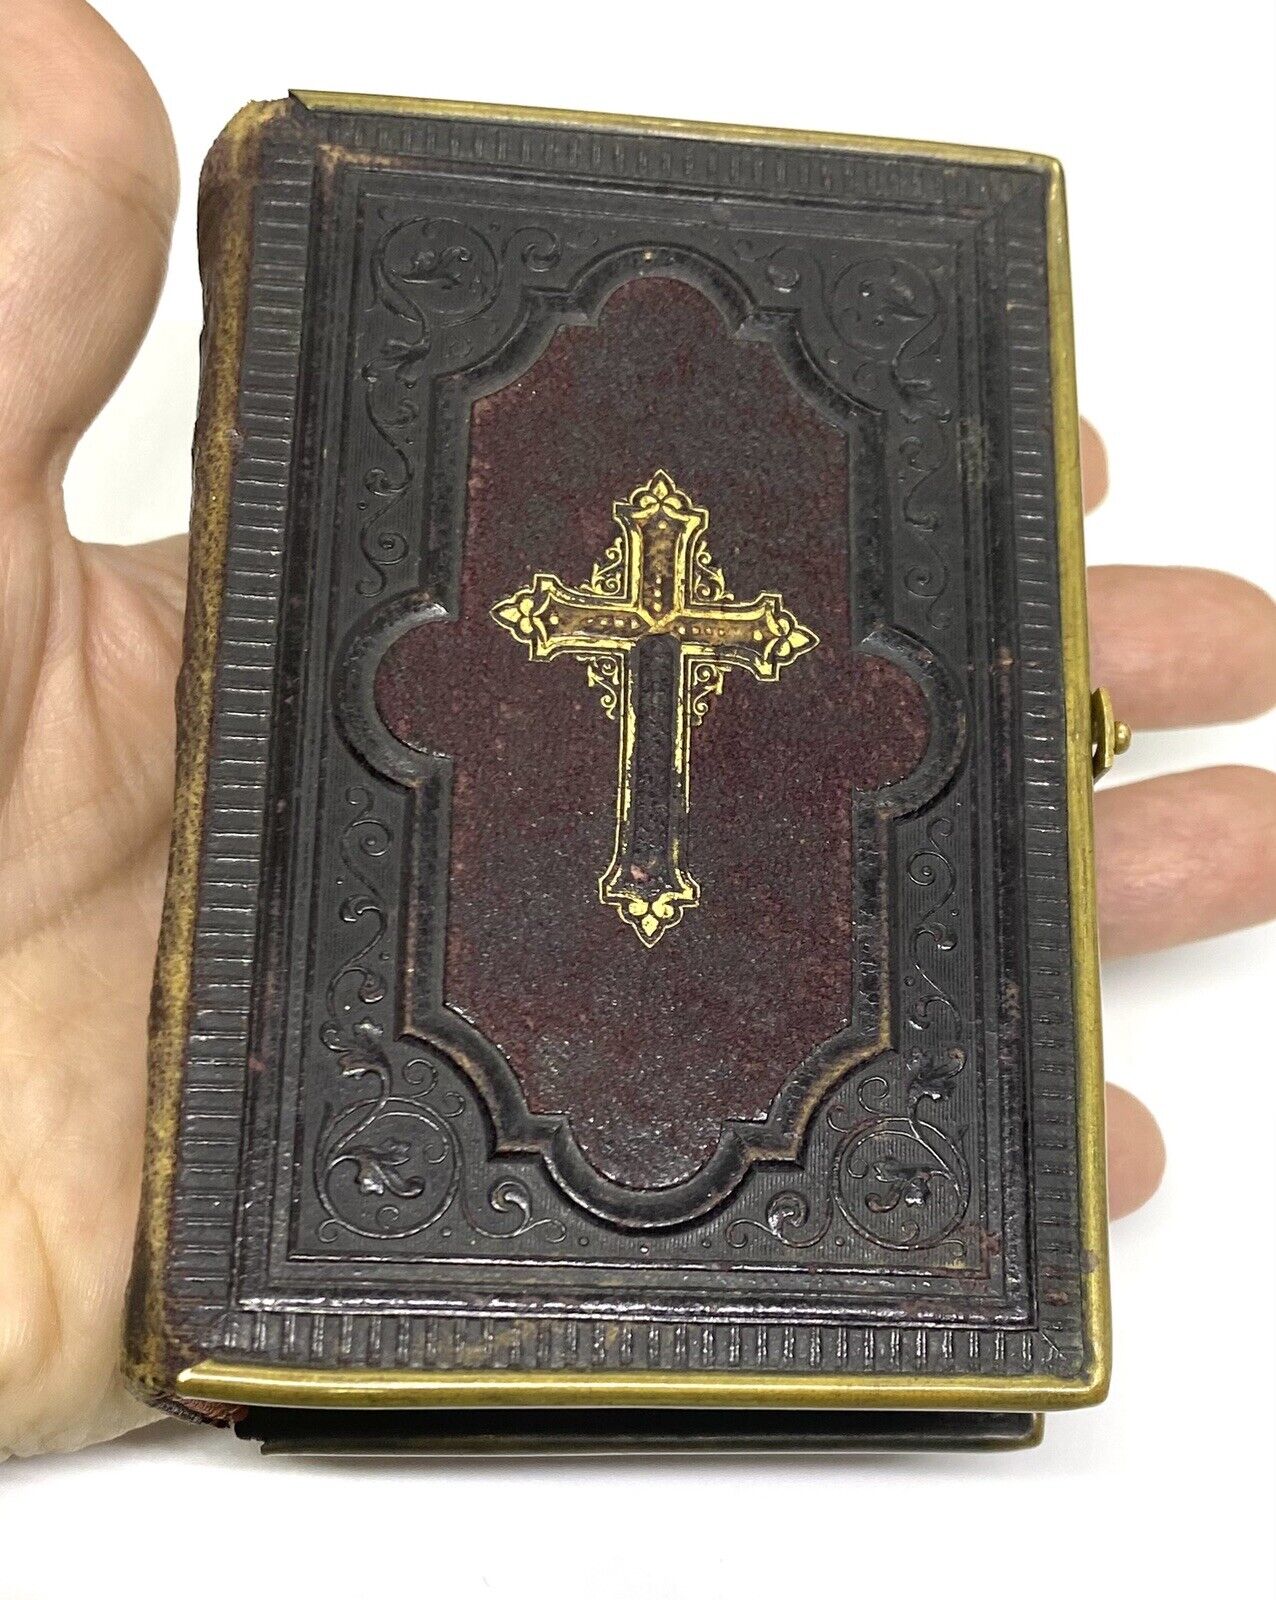 Antique 1889 German Small Bible With Gold Gilded Papper Ends 4.1/8 X 3”